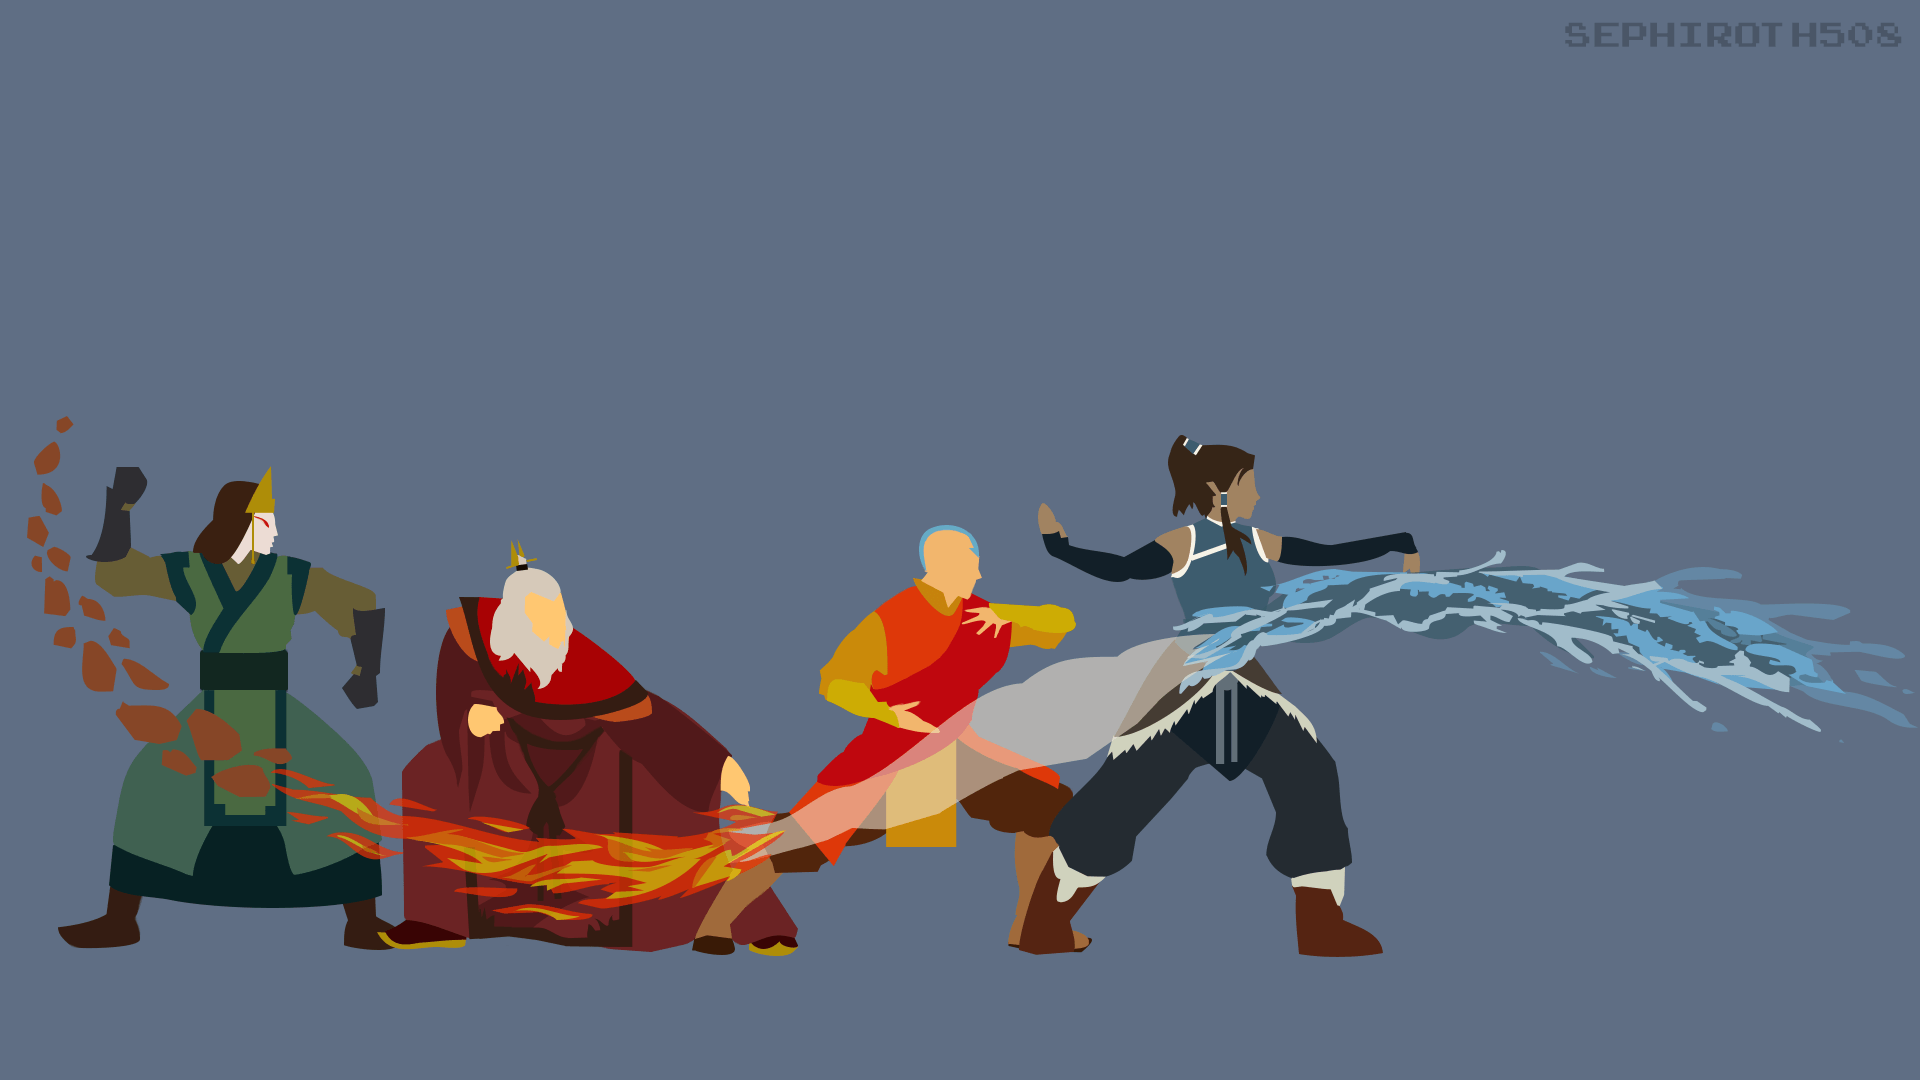 Made a minimalist wallpapers of the iconic Avatar quarta